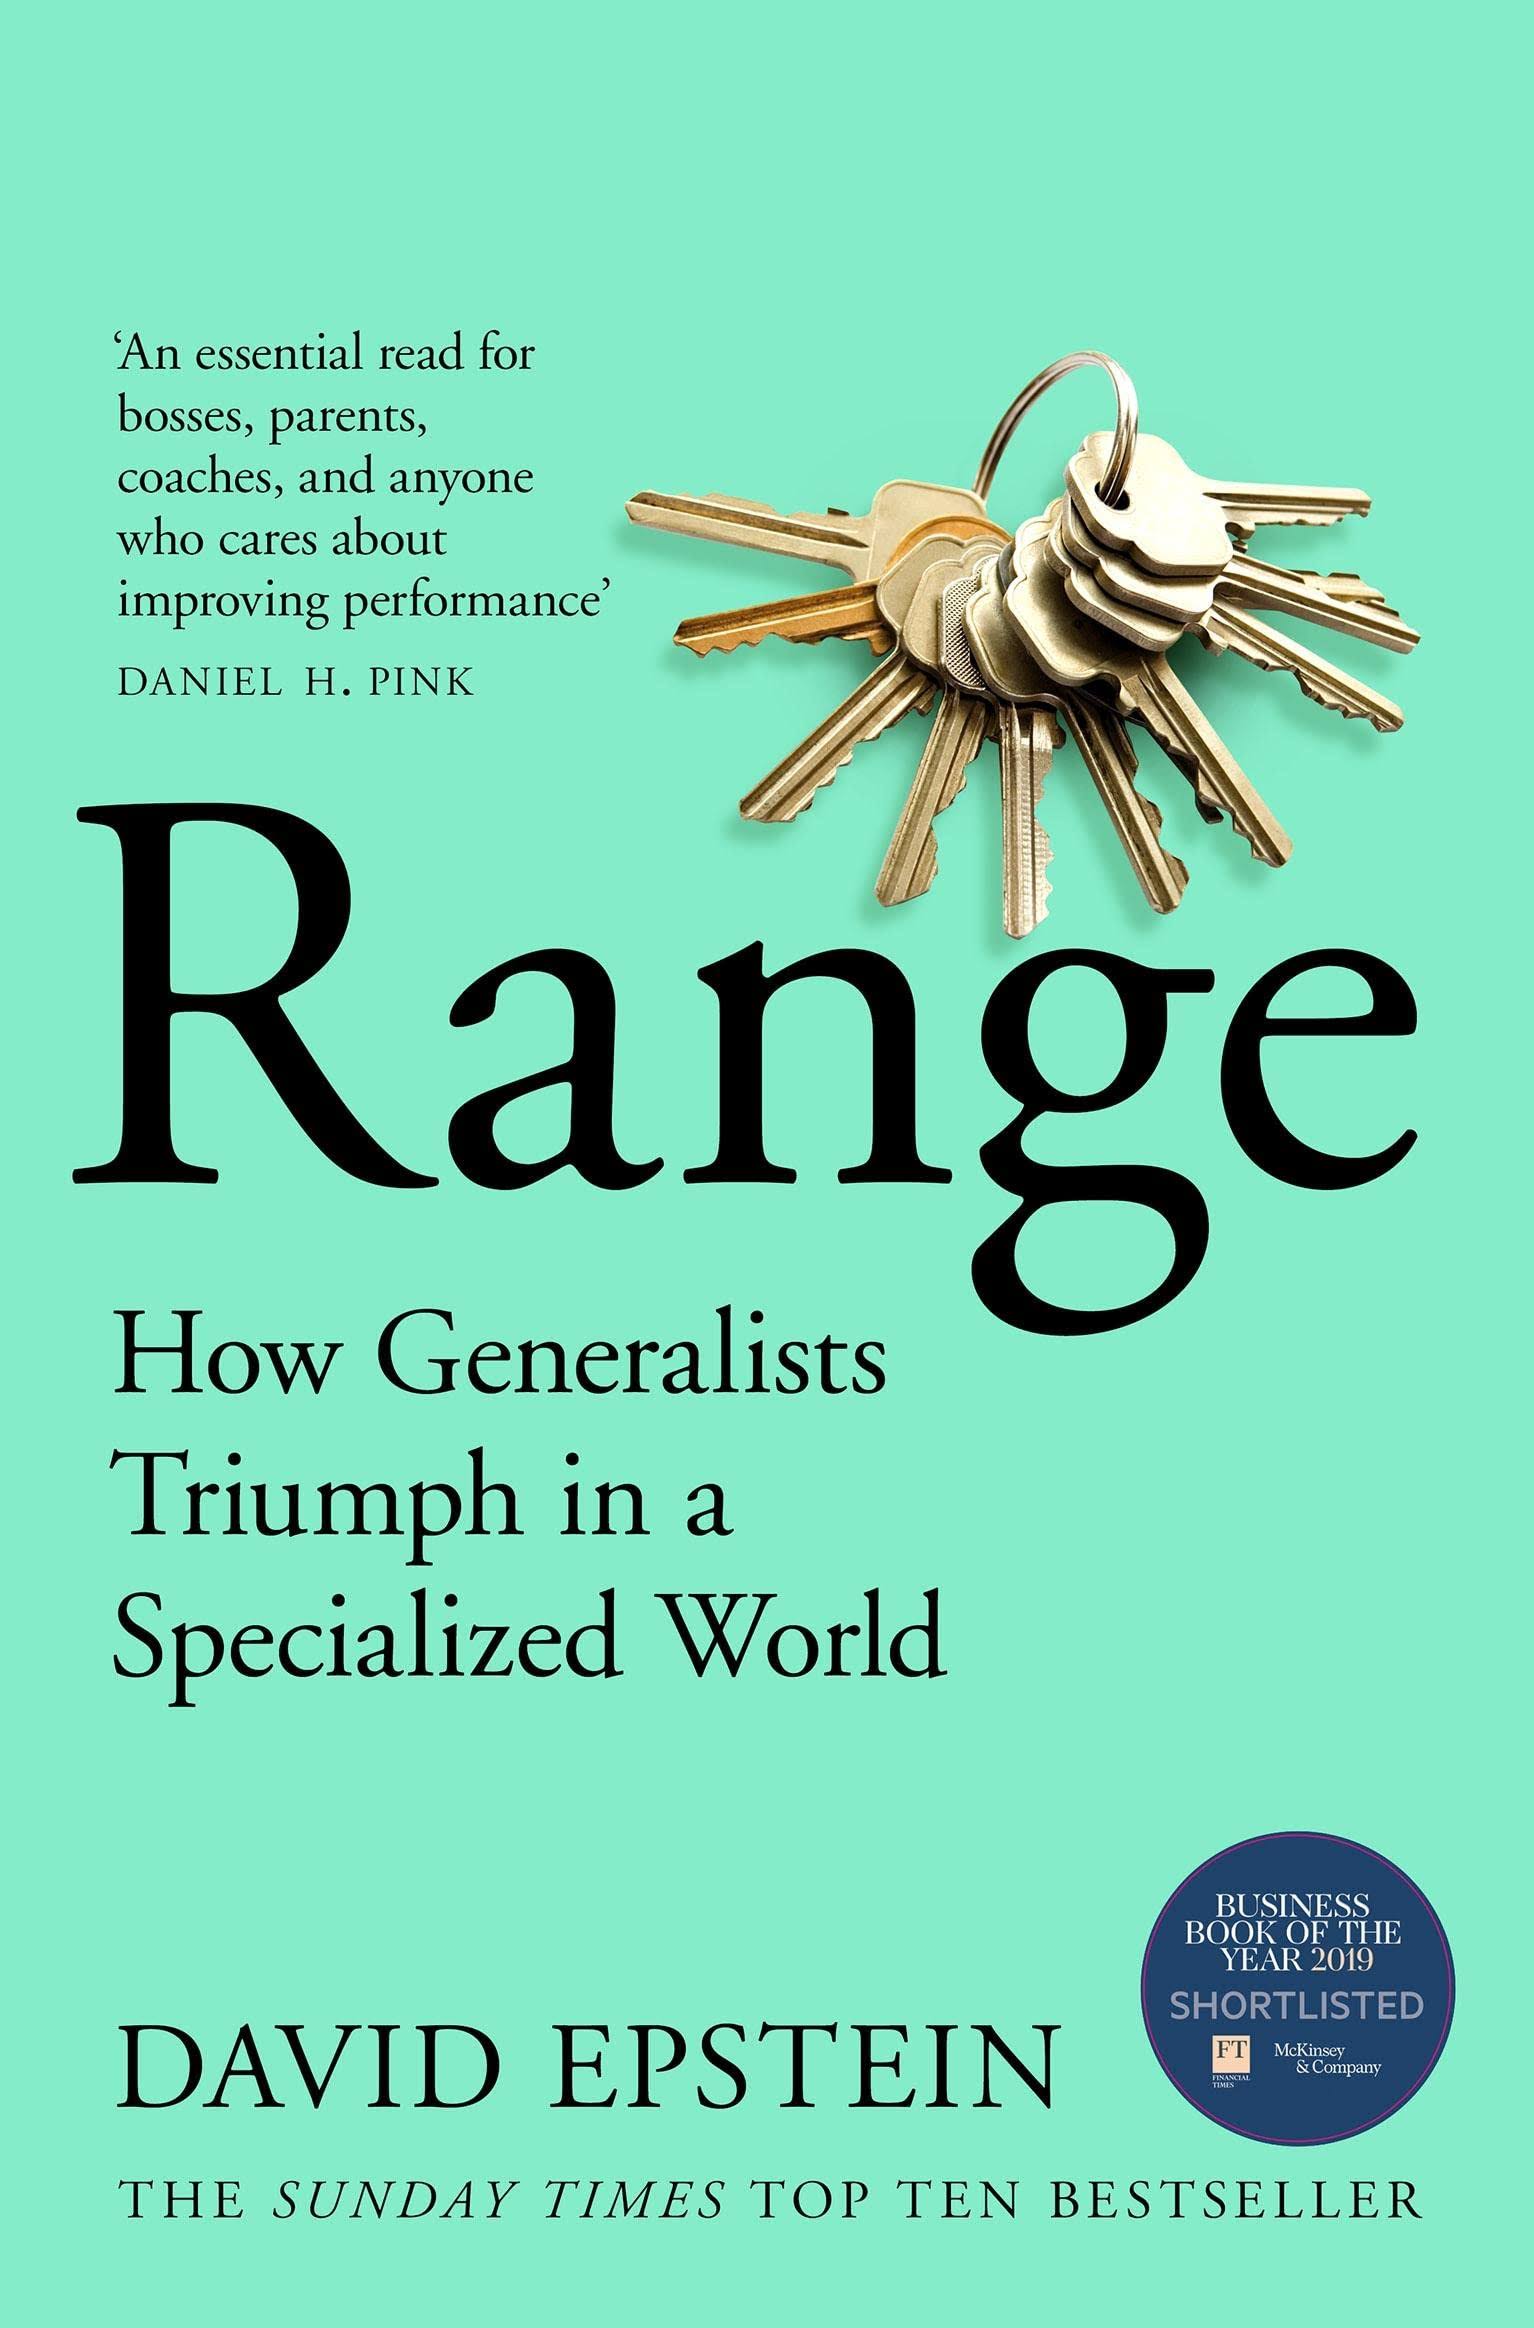 Range by David Epstein: How Generalists Triumph in A Specialized World